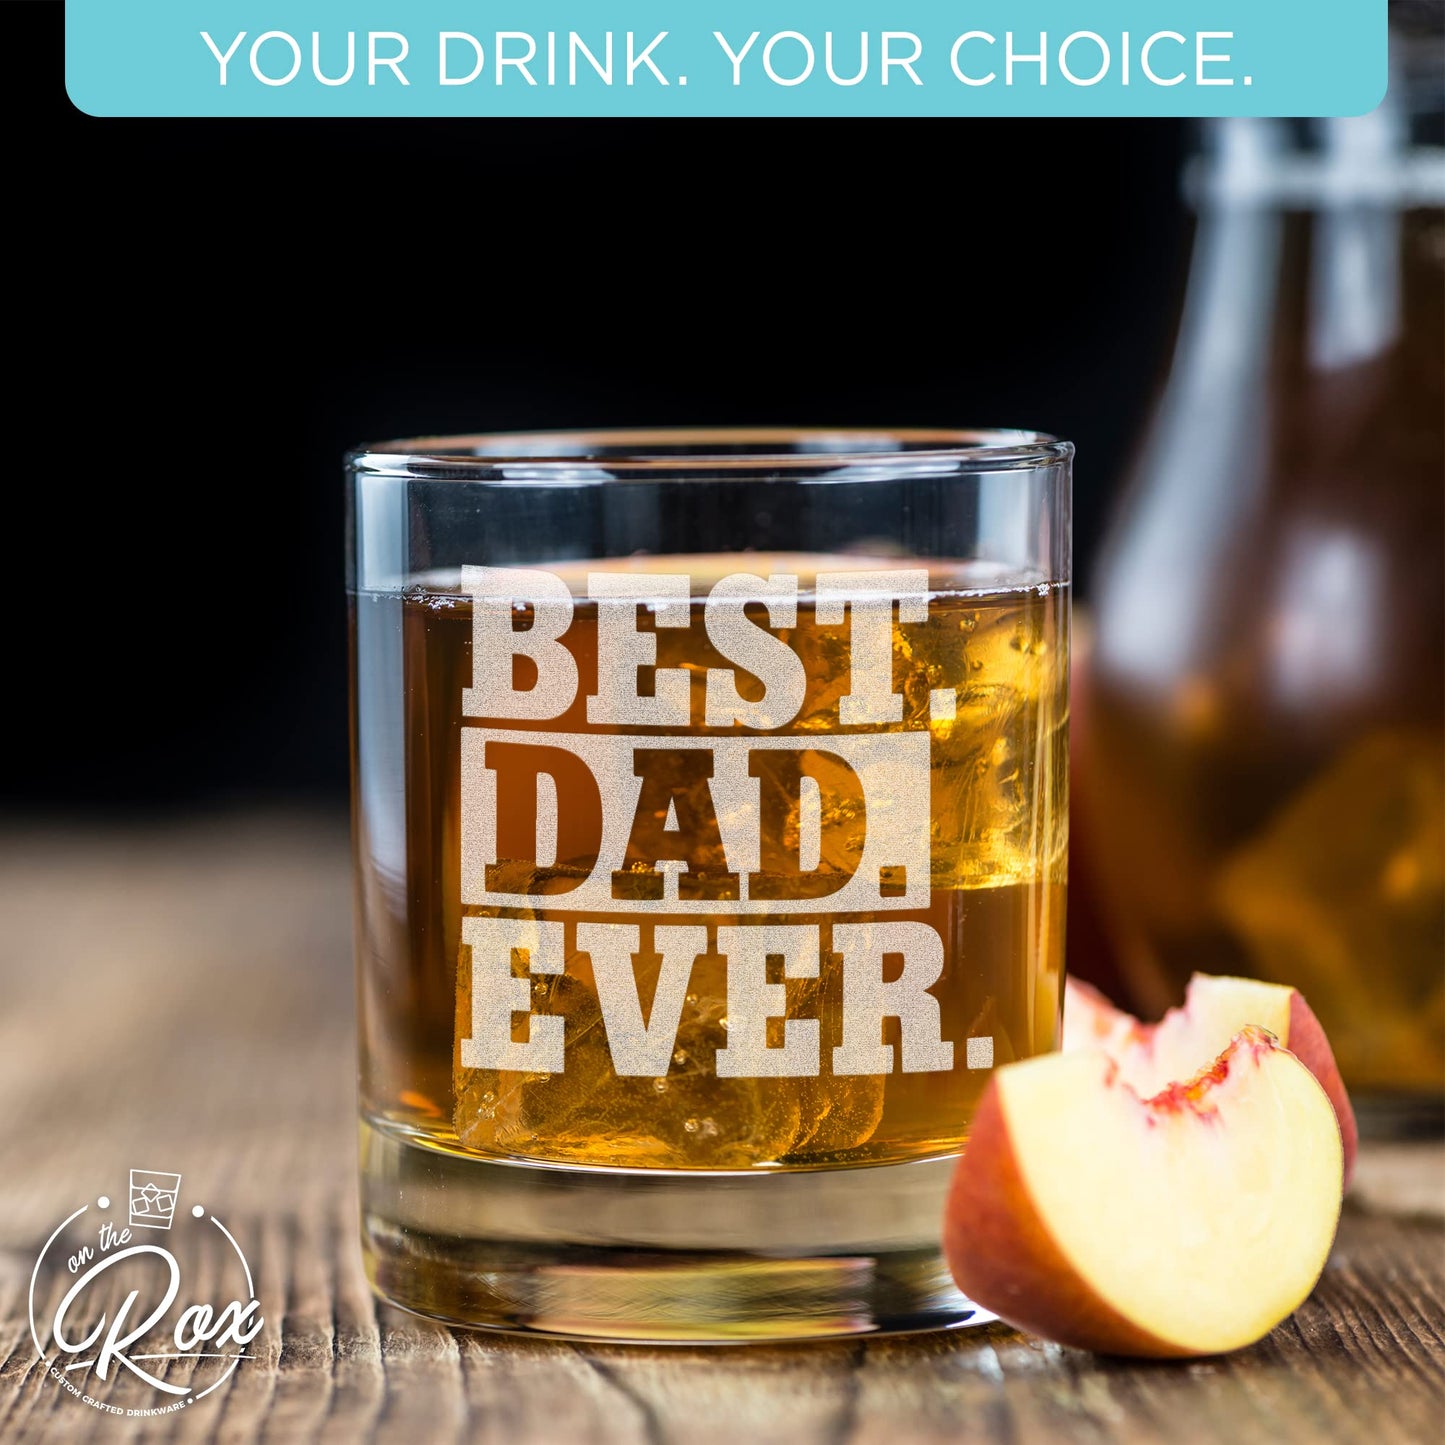 Whiskey Gifts for Dad- 11 Oz "Best Dad Ever" Engraved Whiskey Glass - Father's Day Gift, Dad Birthday Gifts From Daughter, Wife or Son - Bourbon Glass - Old Fashion Glass - 6 Designs To Choose From